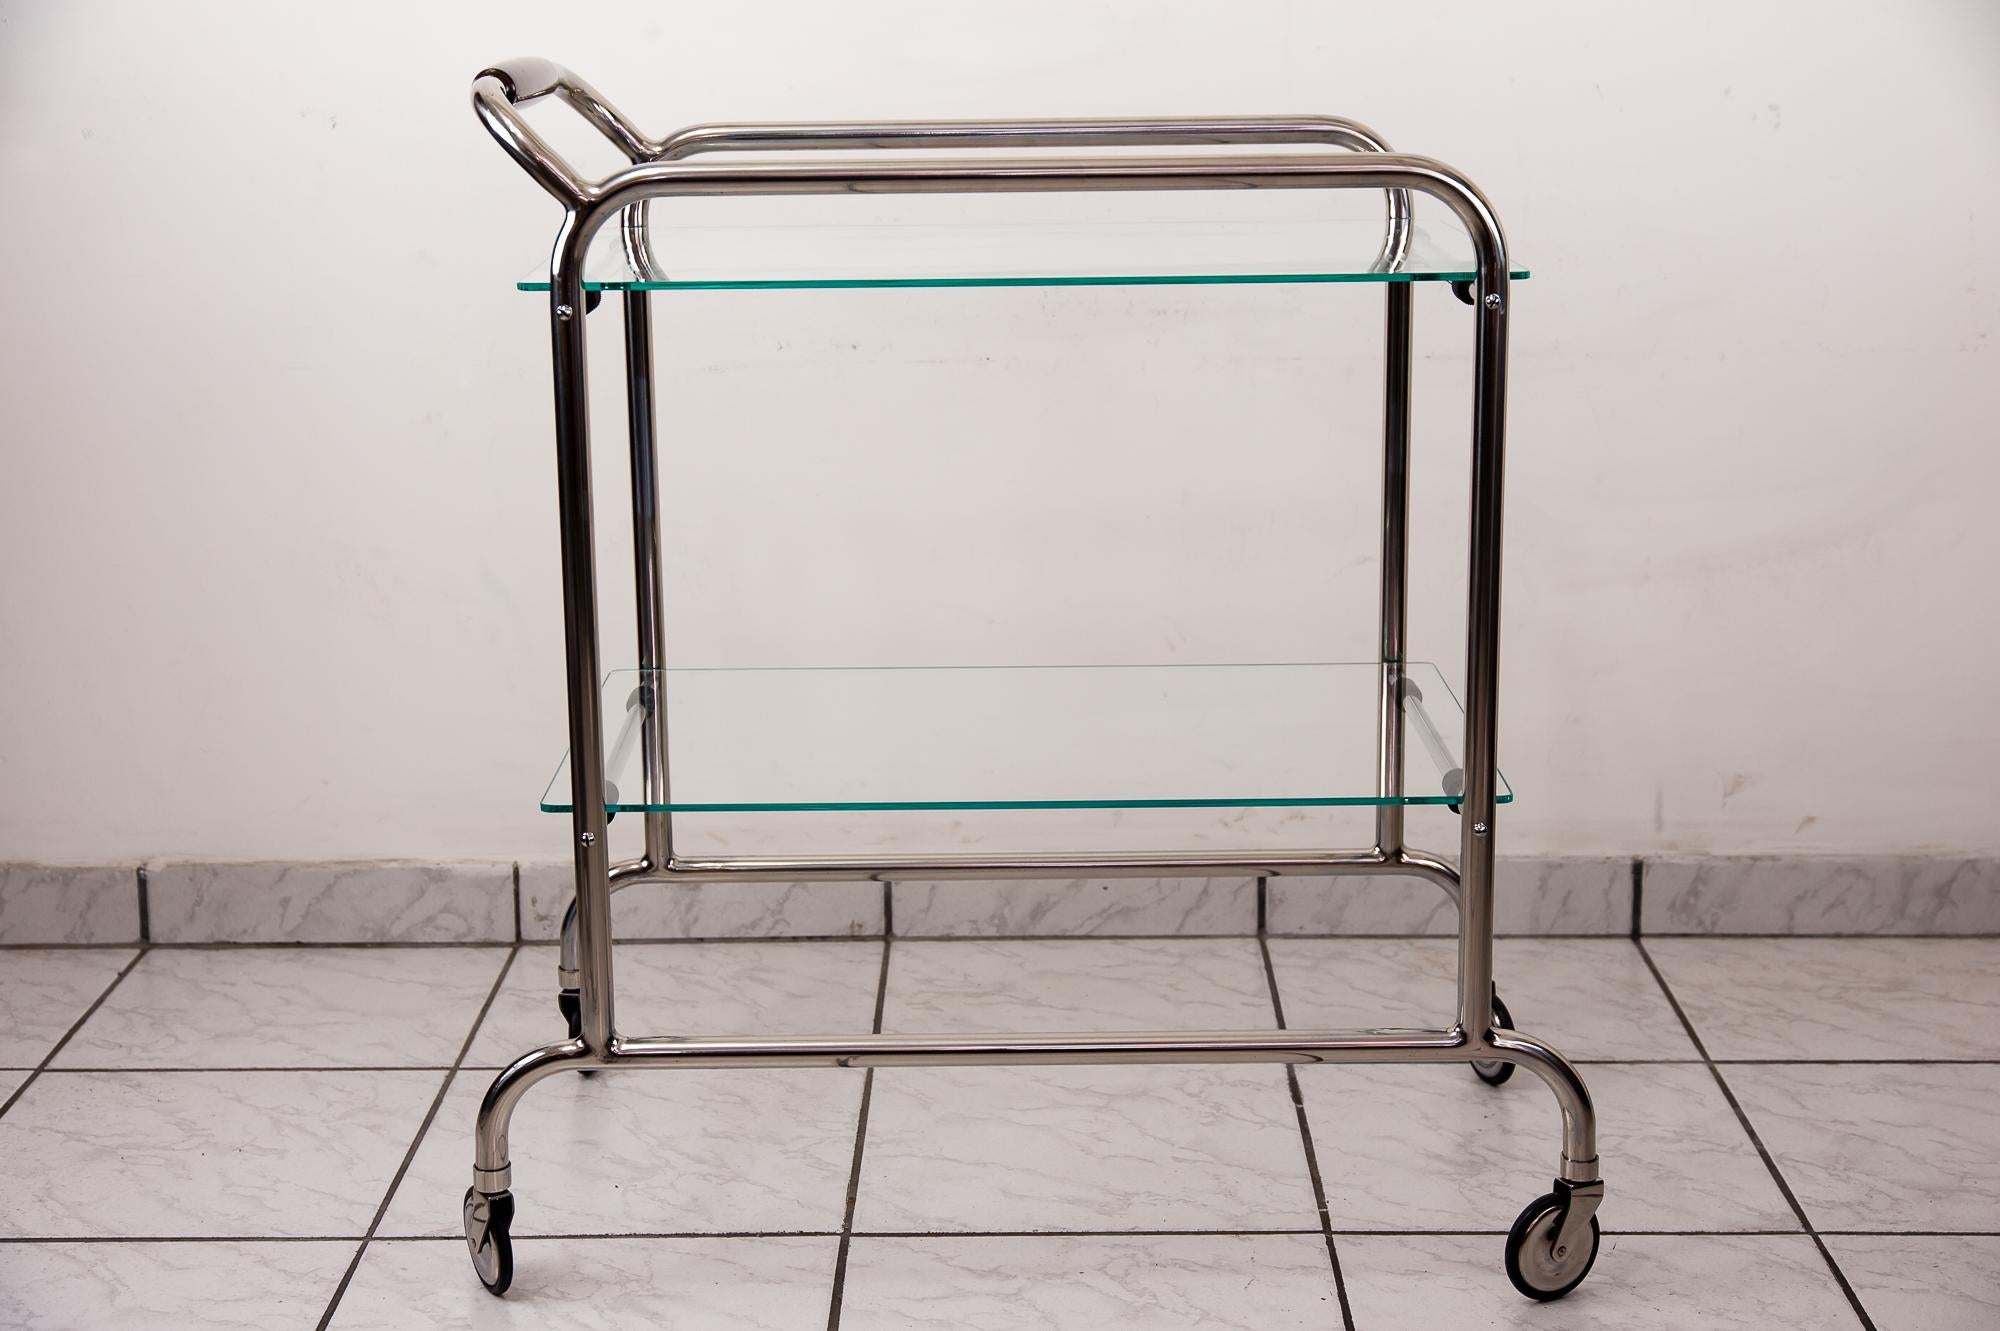 Plated Art Deco Serving Cart 1920s Attributed to Thonet